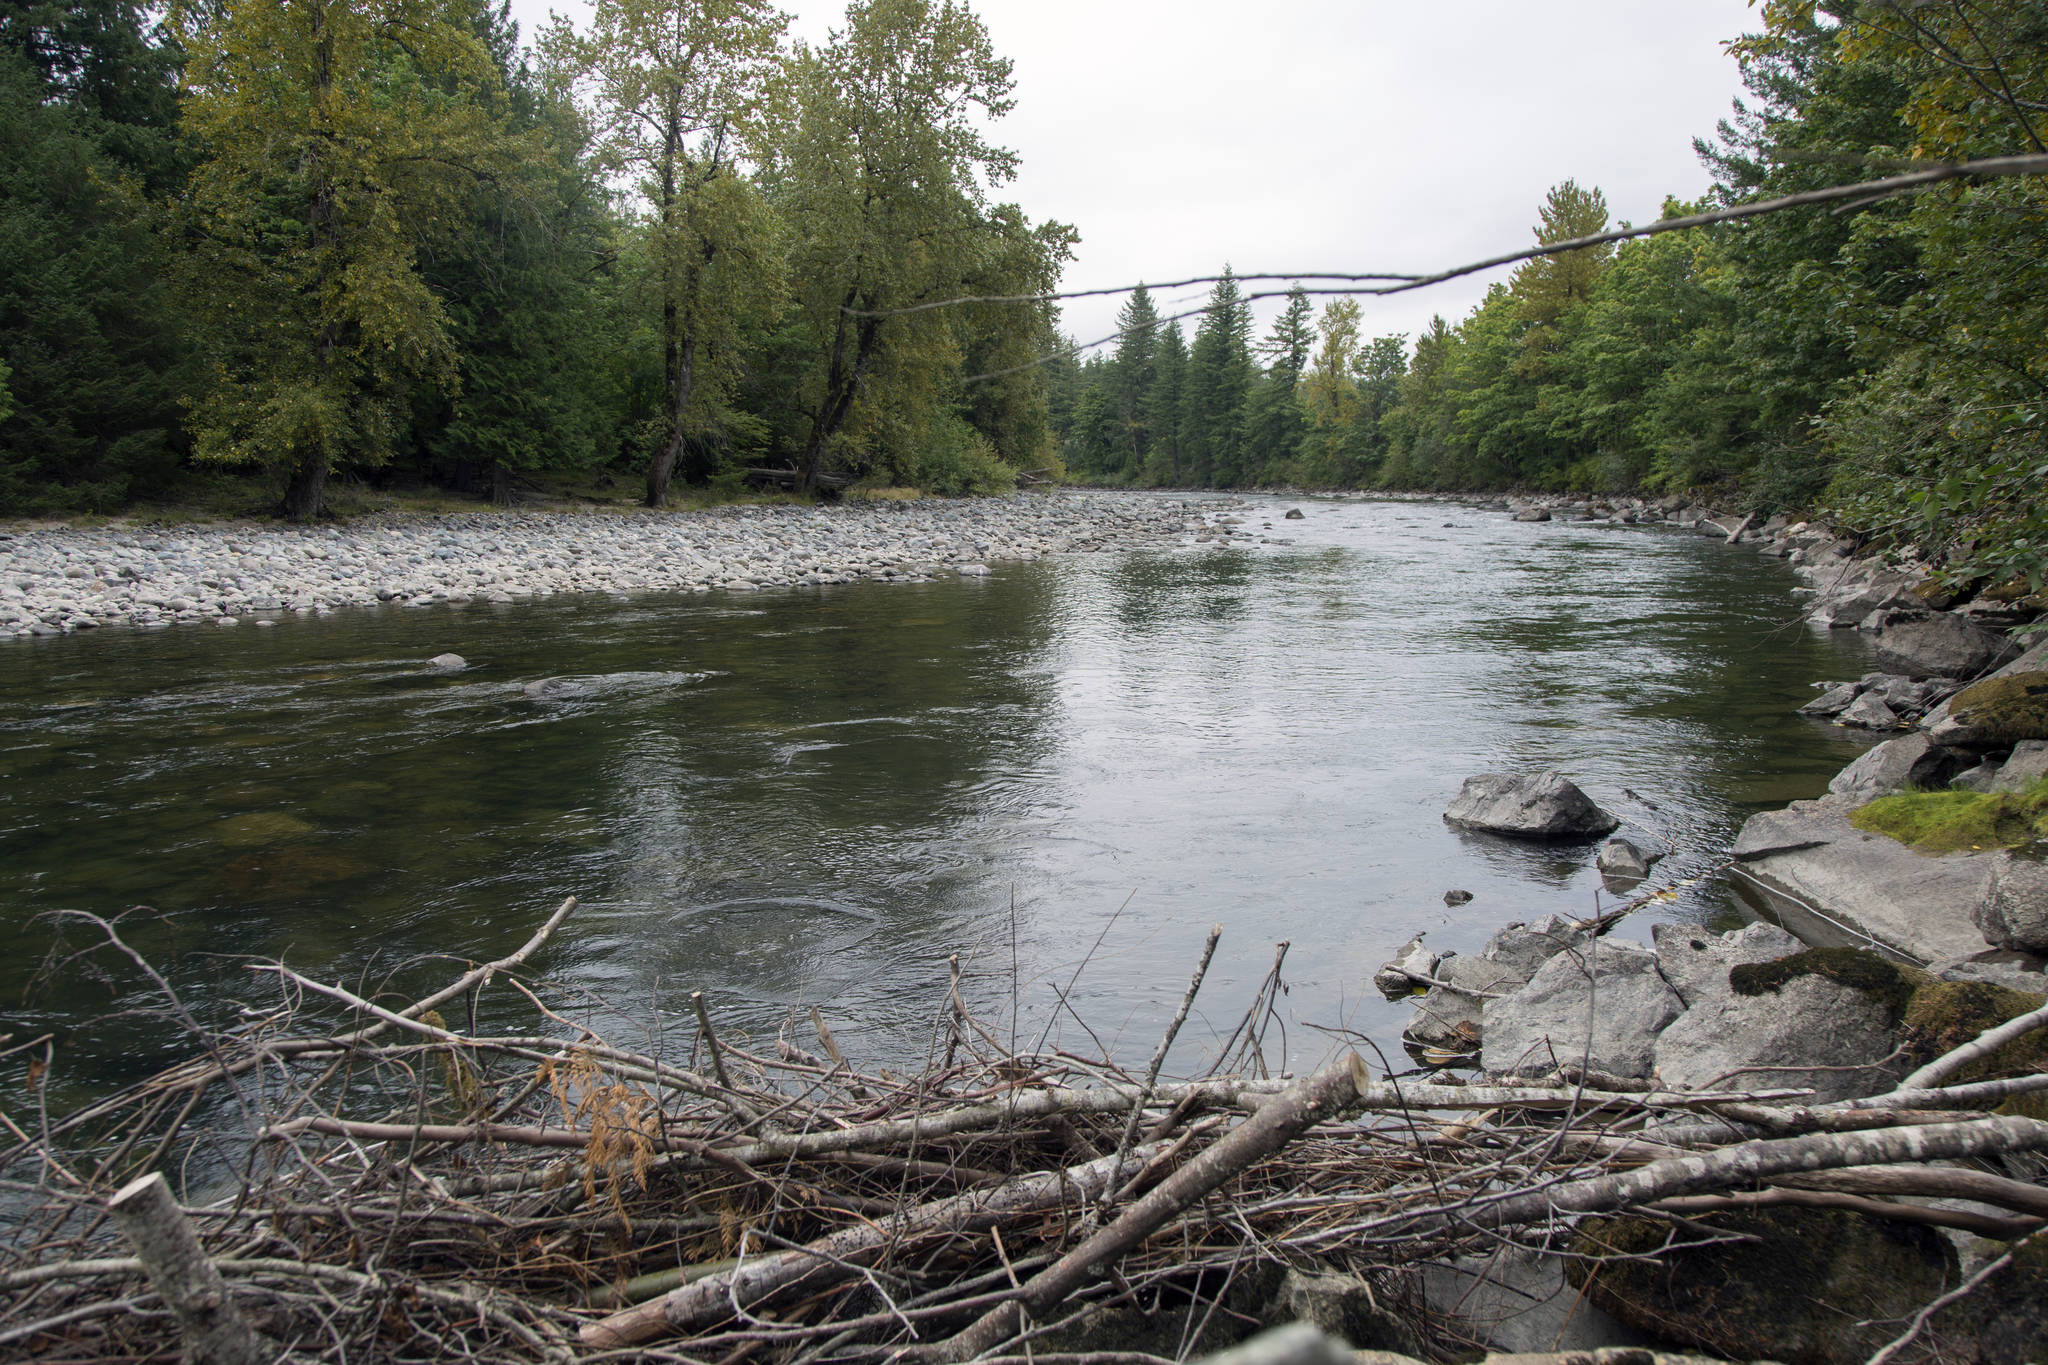 Centennial Well is tightly connected to the Snoqualmie River. North Bend is required to find two mitigation sources which can be tapped to replenish water in the river on days with low flows. Ashley Hiruko/staff photo